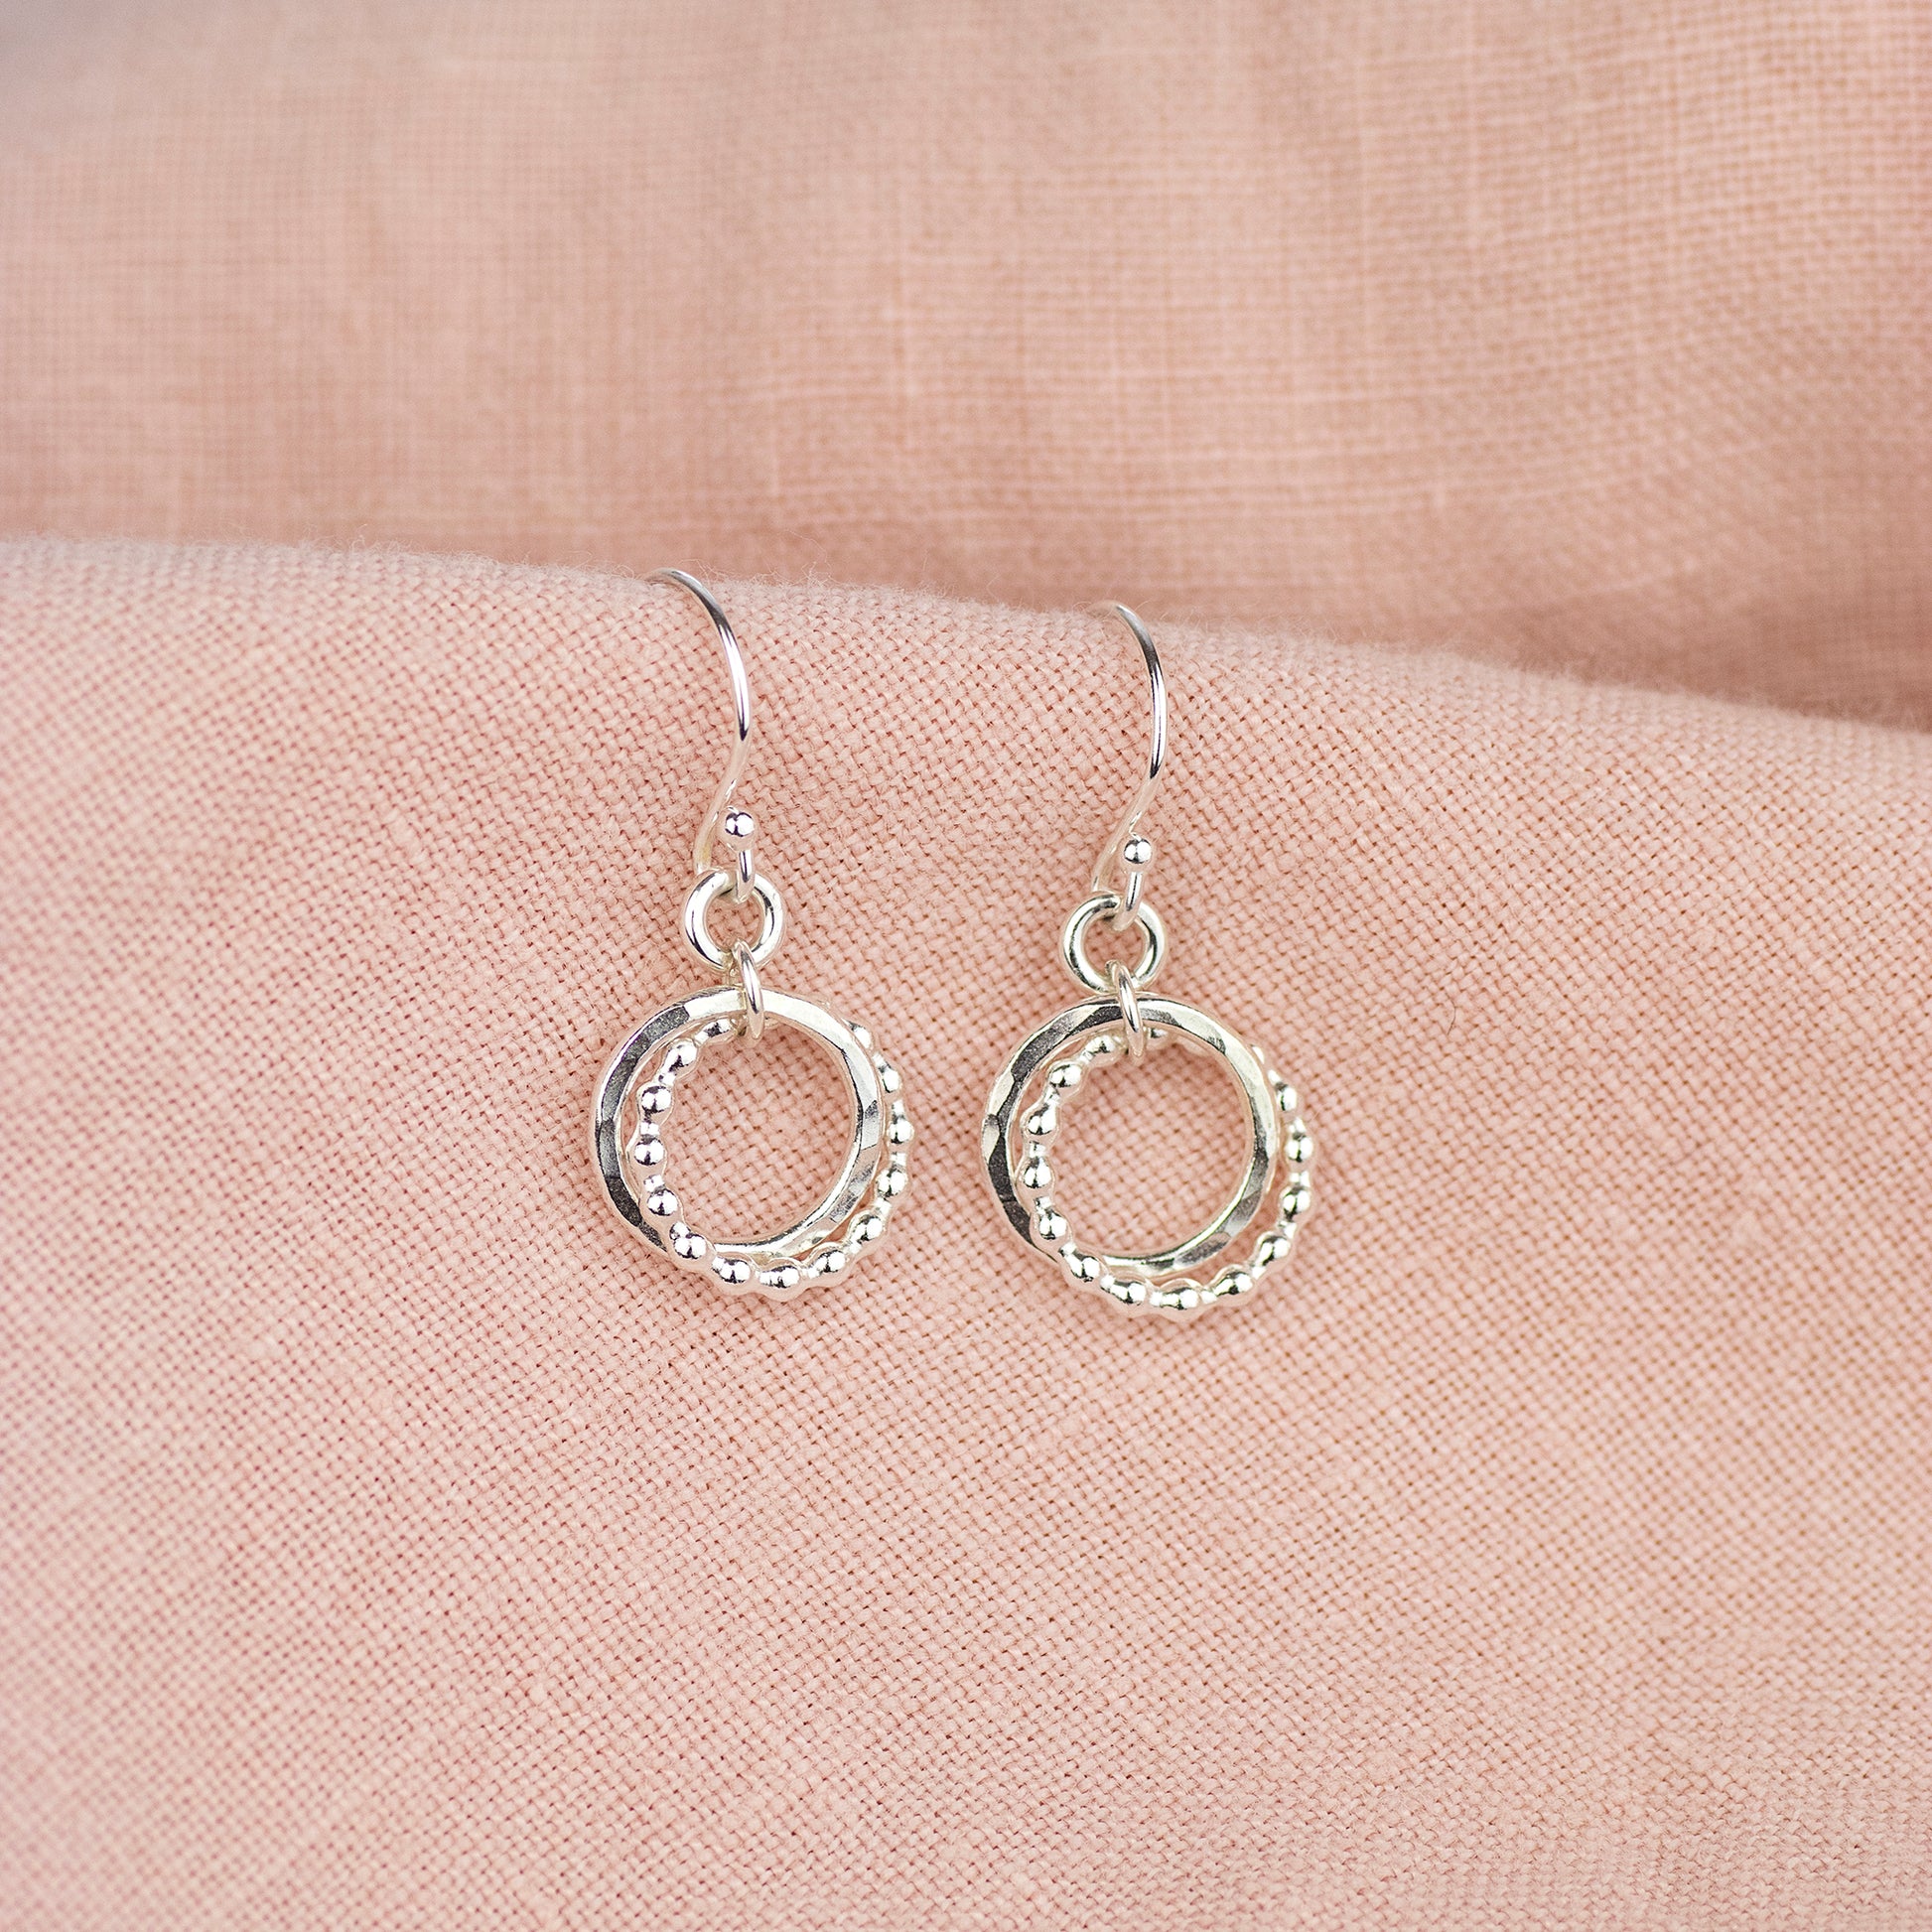 Silver Love Knot Earrings - 2 Loved Ones Linked for a Lifetime